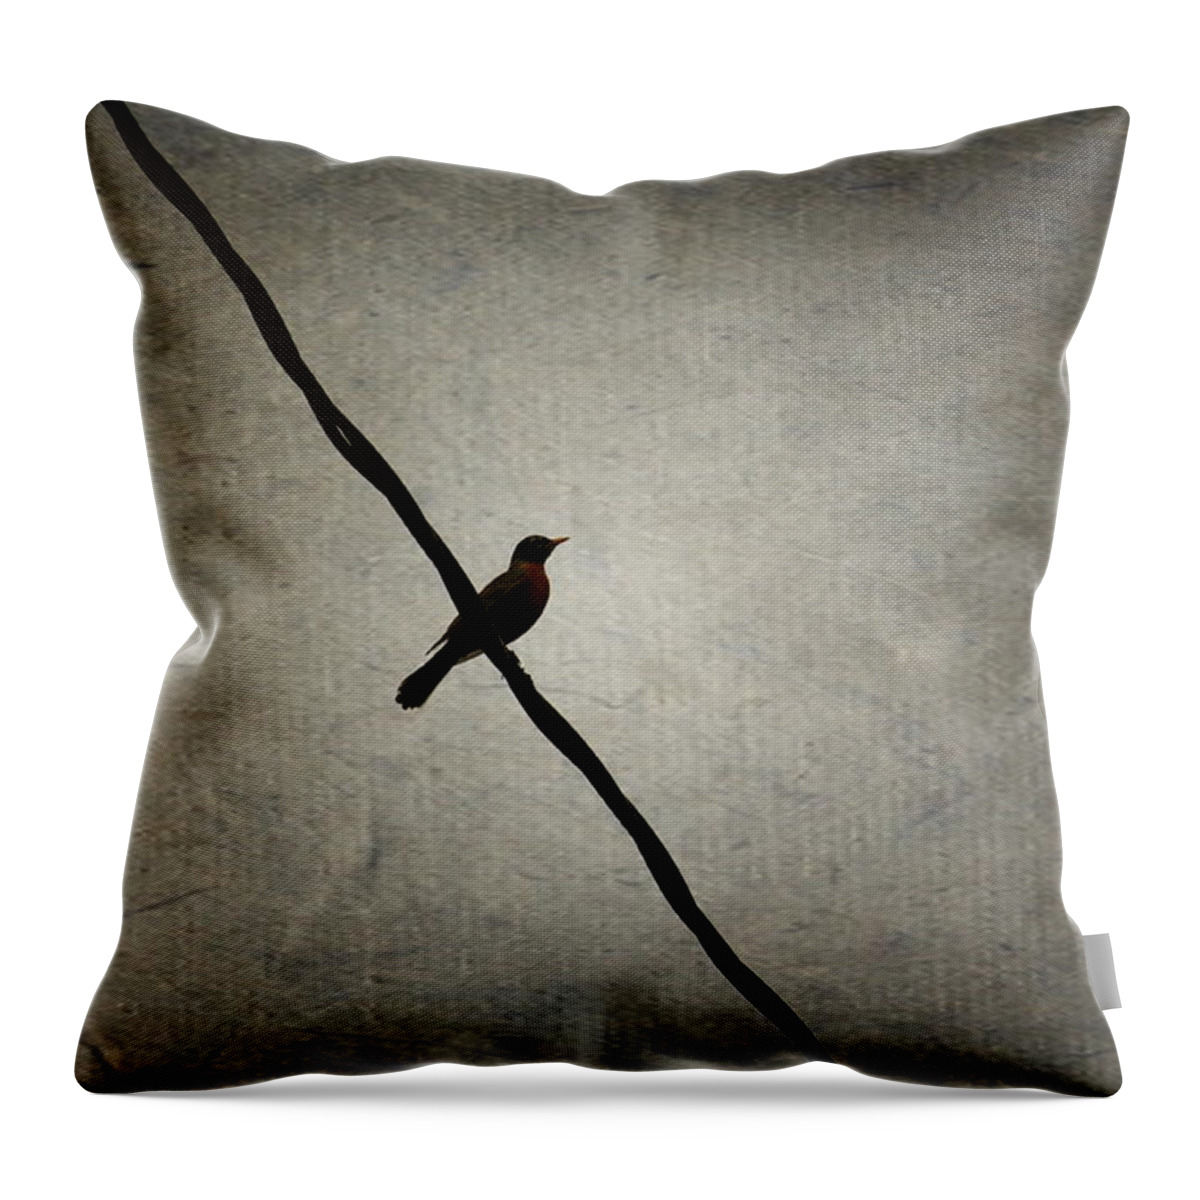 Bird Photographs Throw Pillow featuring the photograph Bird On The Wire by Ester McGuire